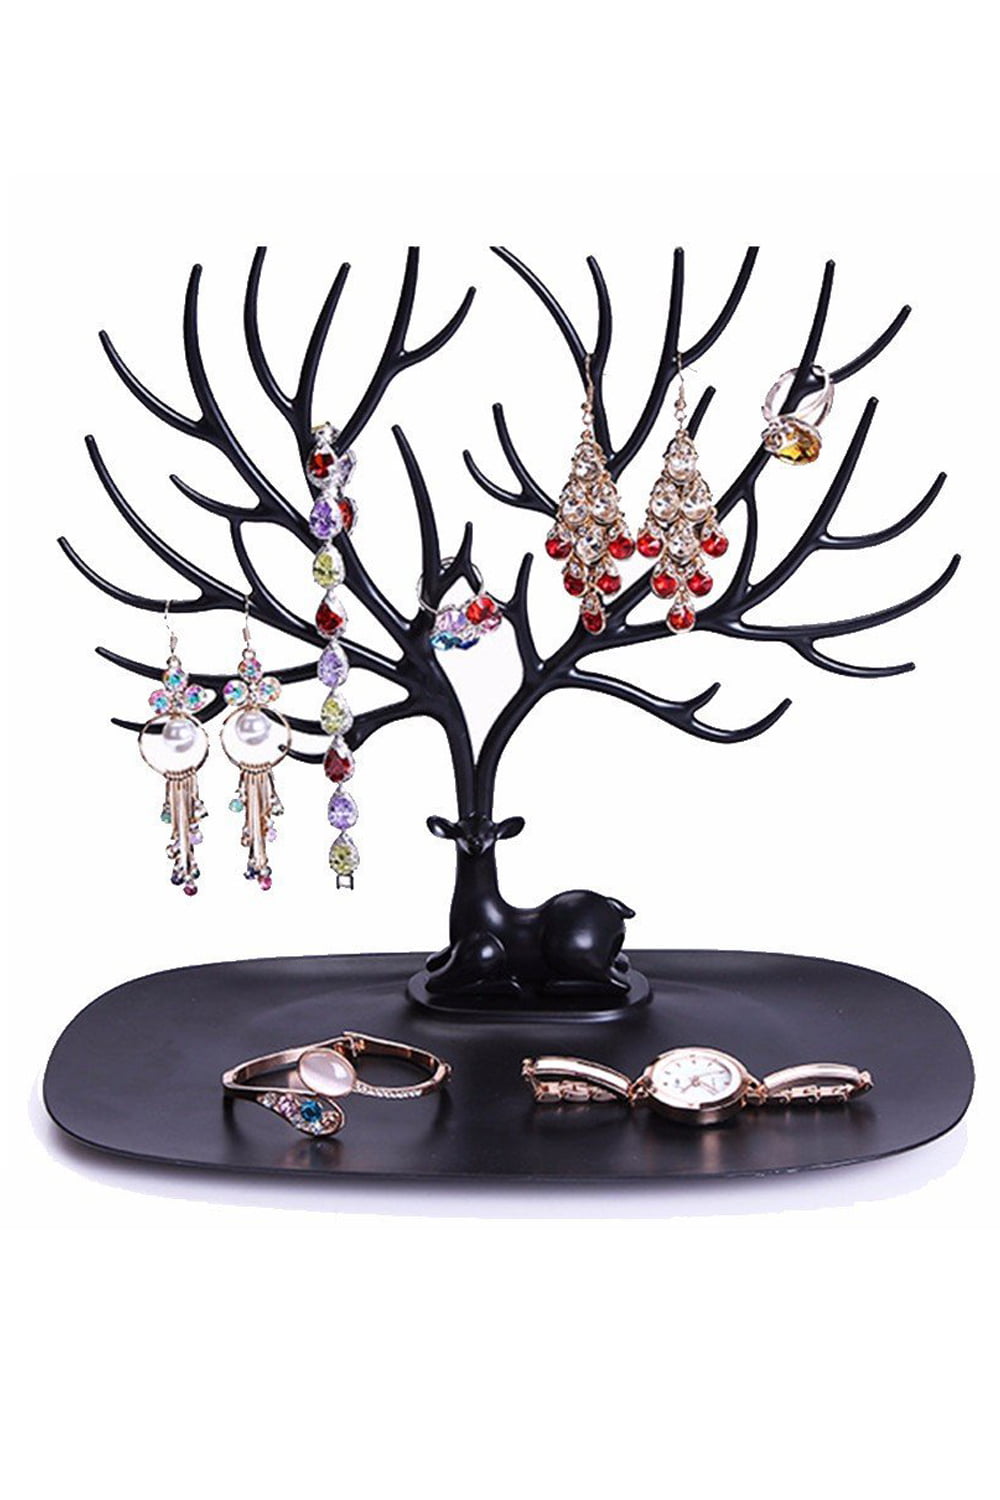 Jewelry Necklace Ring Earring Tree Stand Display Organizer Holder Show Rack   aa 